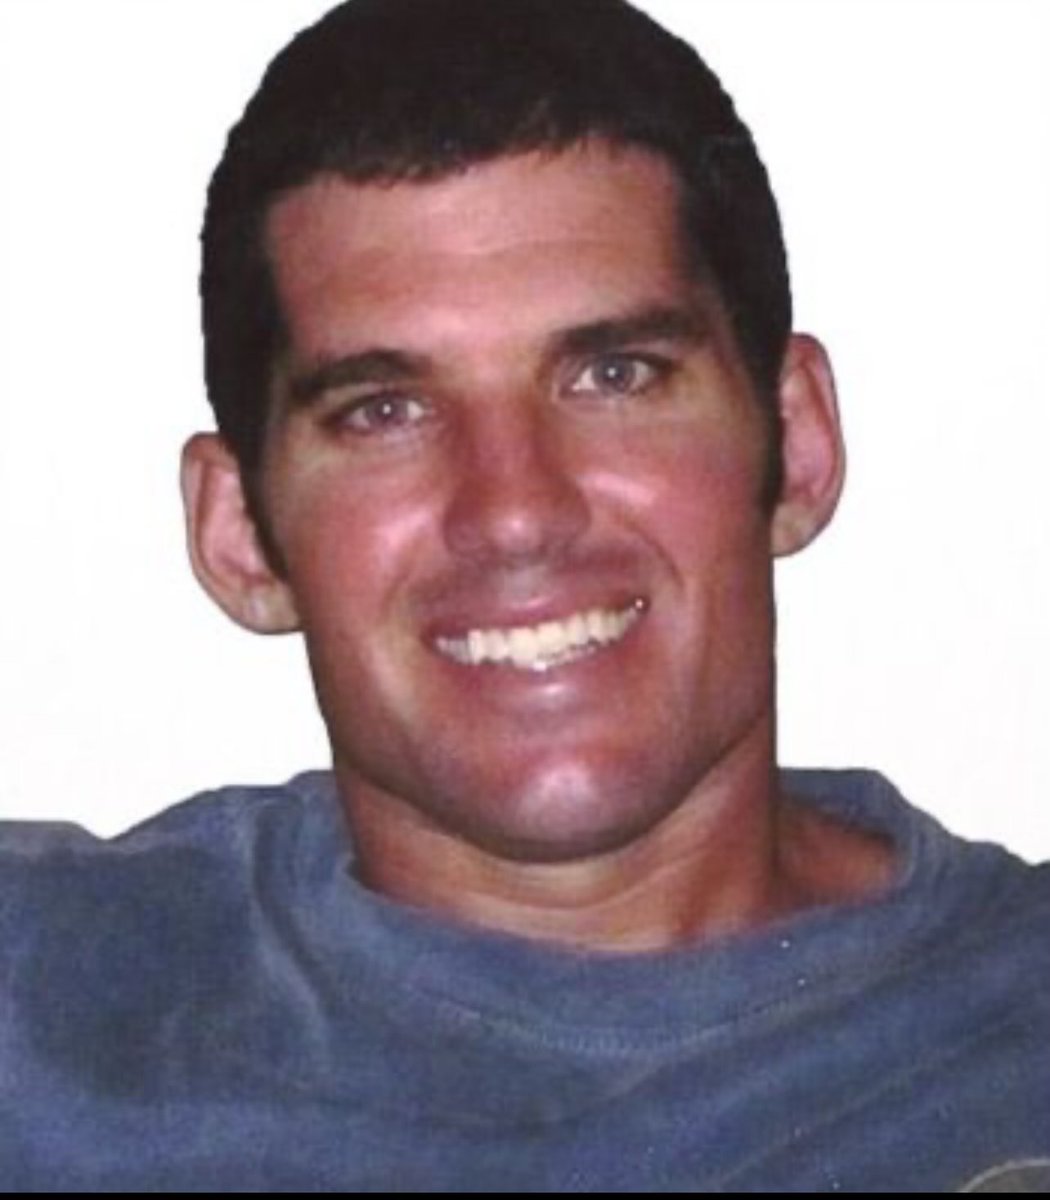 Today we Honor and Remember Senior Chief Special Warfare Operator (SEAL) William 'Ryan' Owens who was killed in action on January 29, 2017, and pledge a Nation of Support to those left behind.

#ANationofSupport #Teammates #NeverForgotten #NeverForget #HonorAndRemember